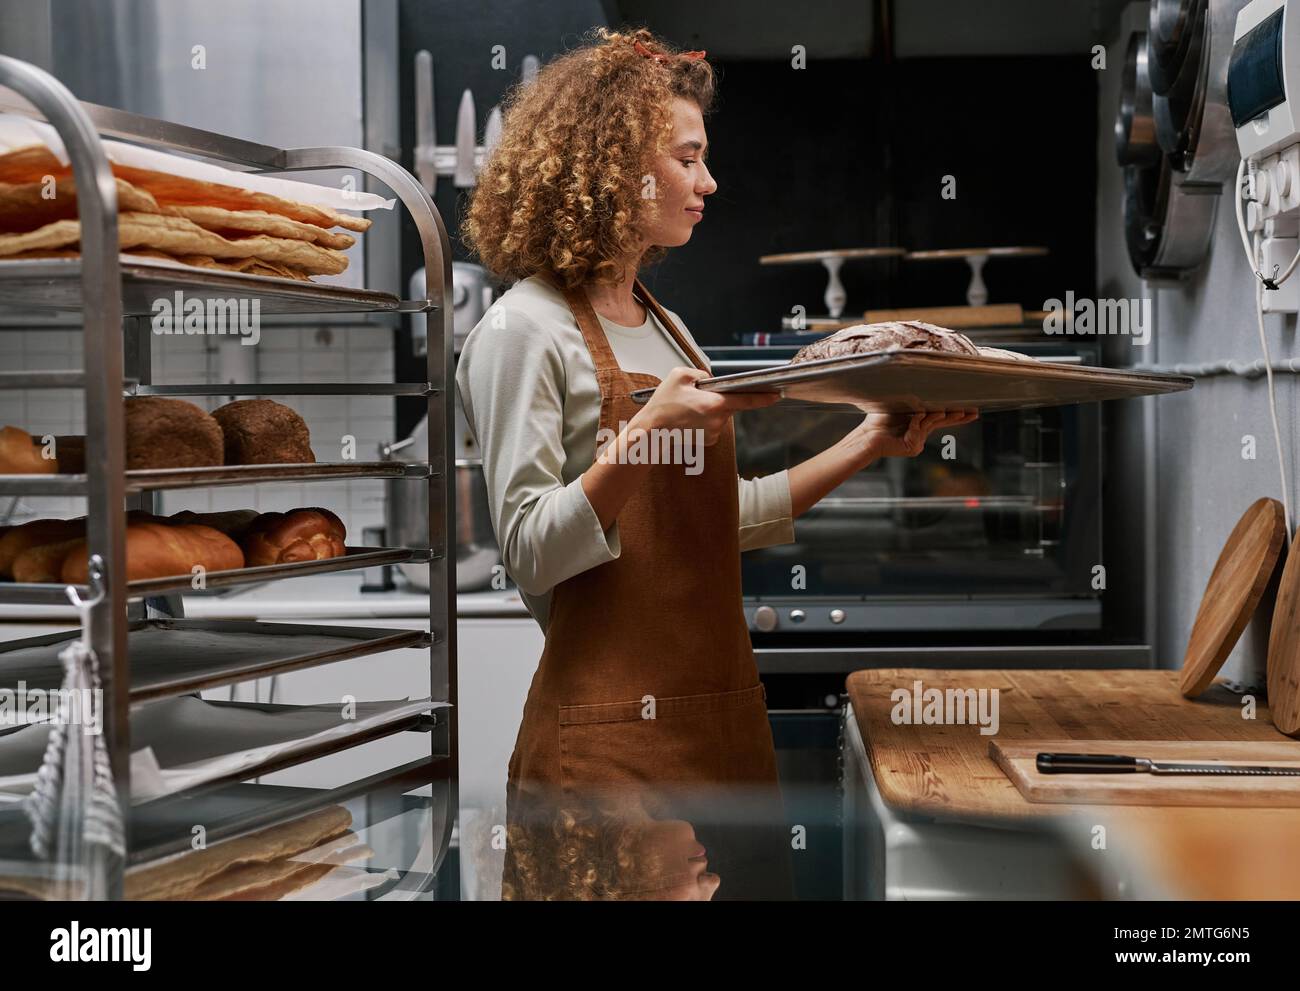 Happy baker looking at fresh loafs on tray she baked for selling Stock Photo